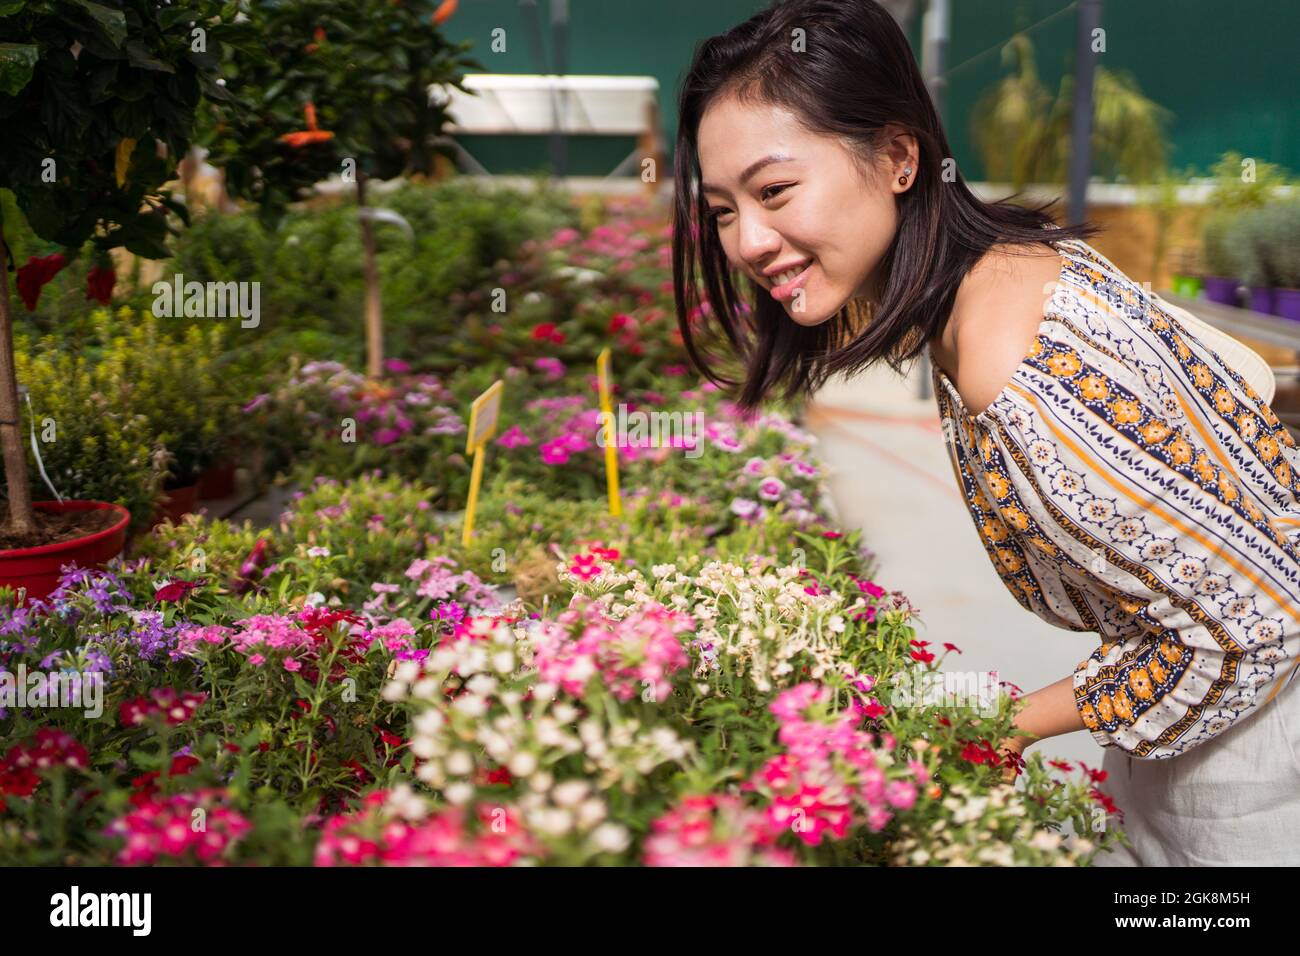 Side view of cheerful young ethnic female shopper leaning forward while picking blossoming flowers in garden center Stock Photo